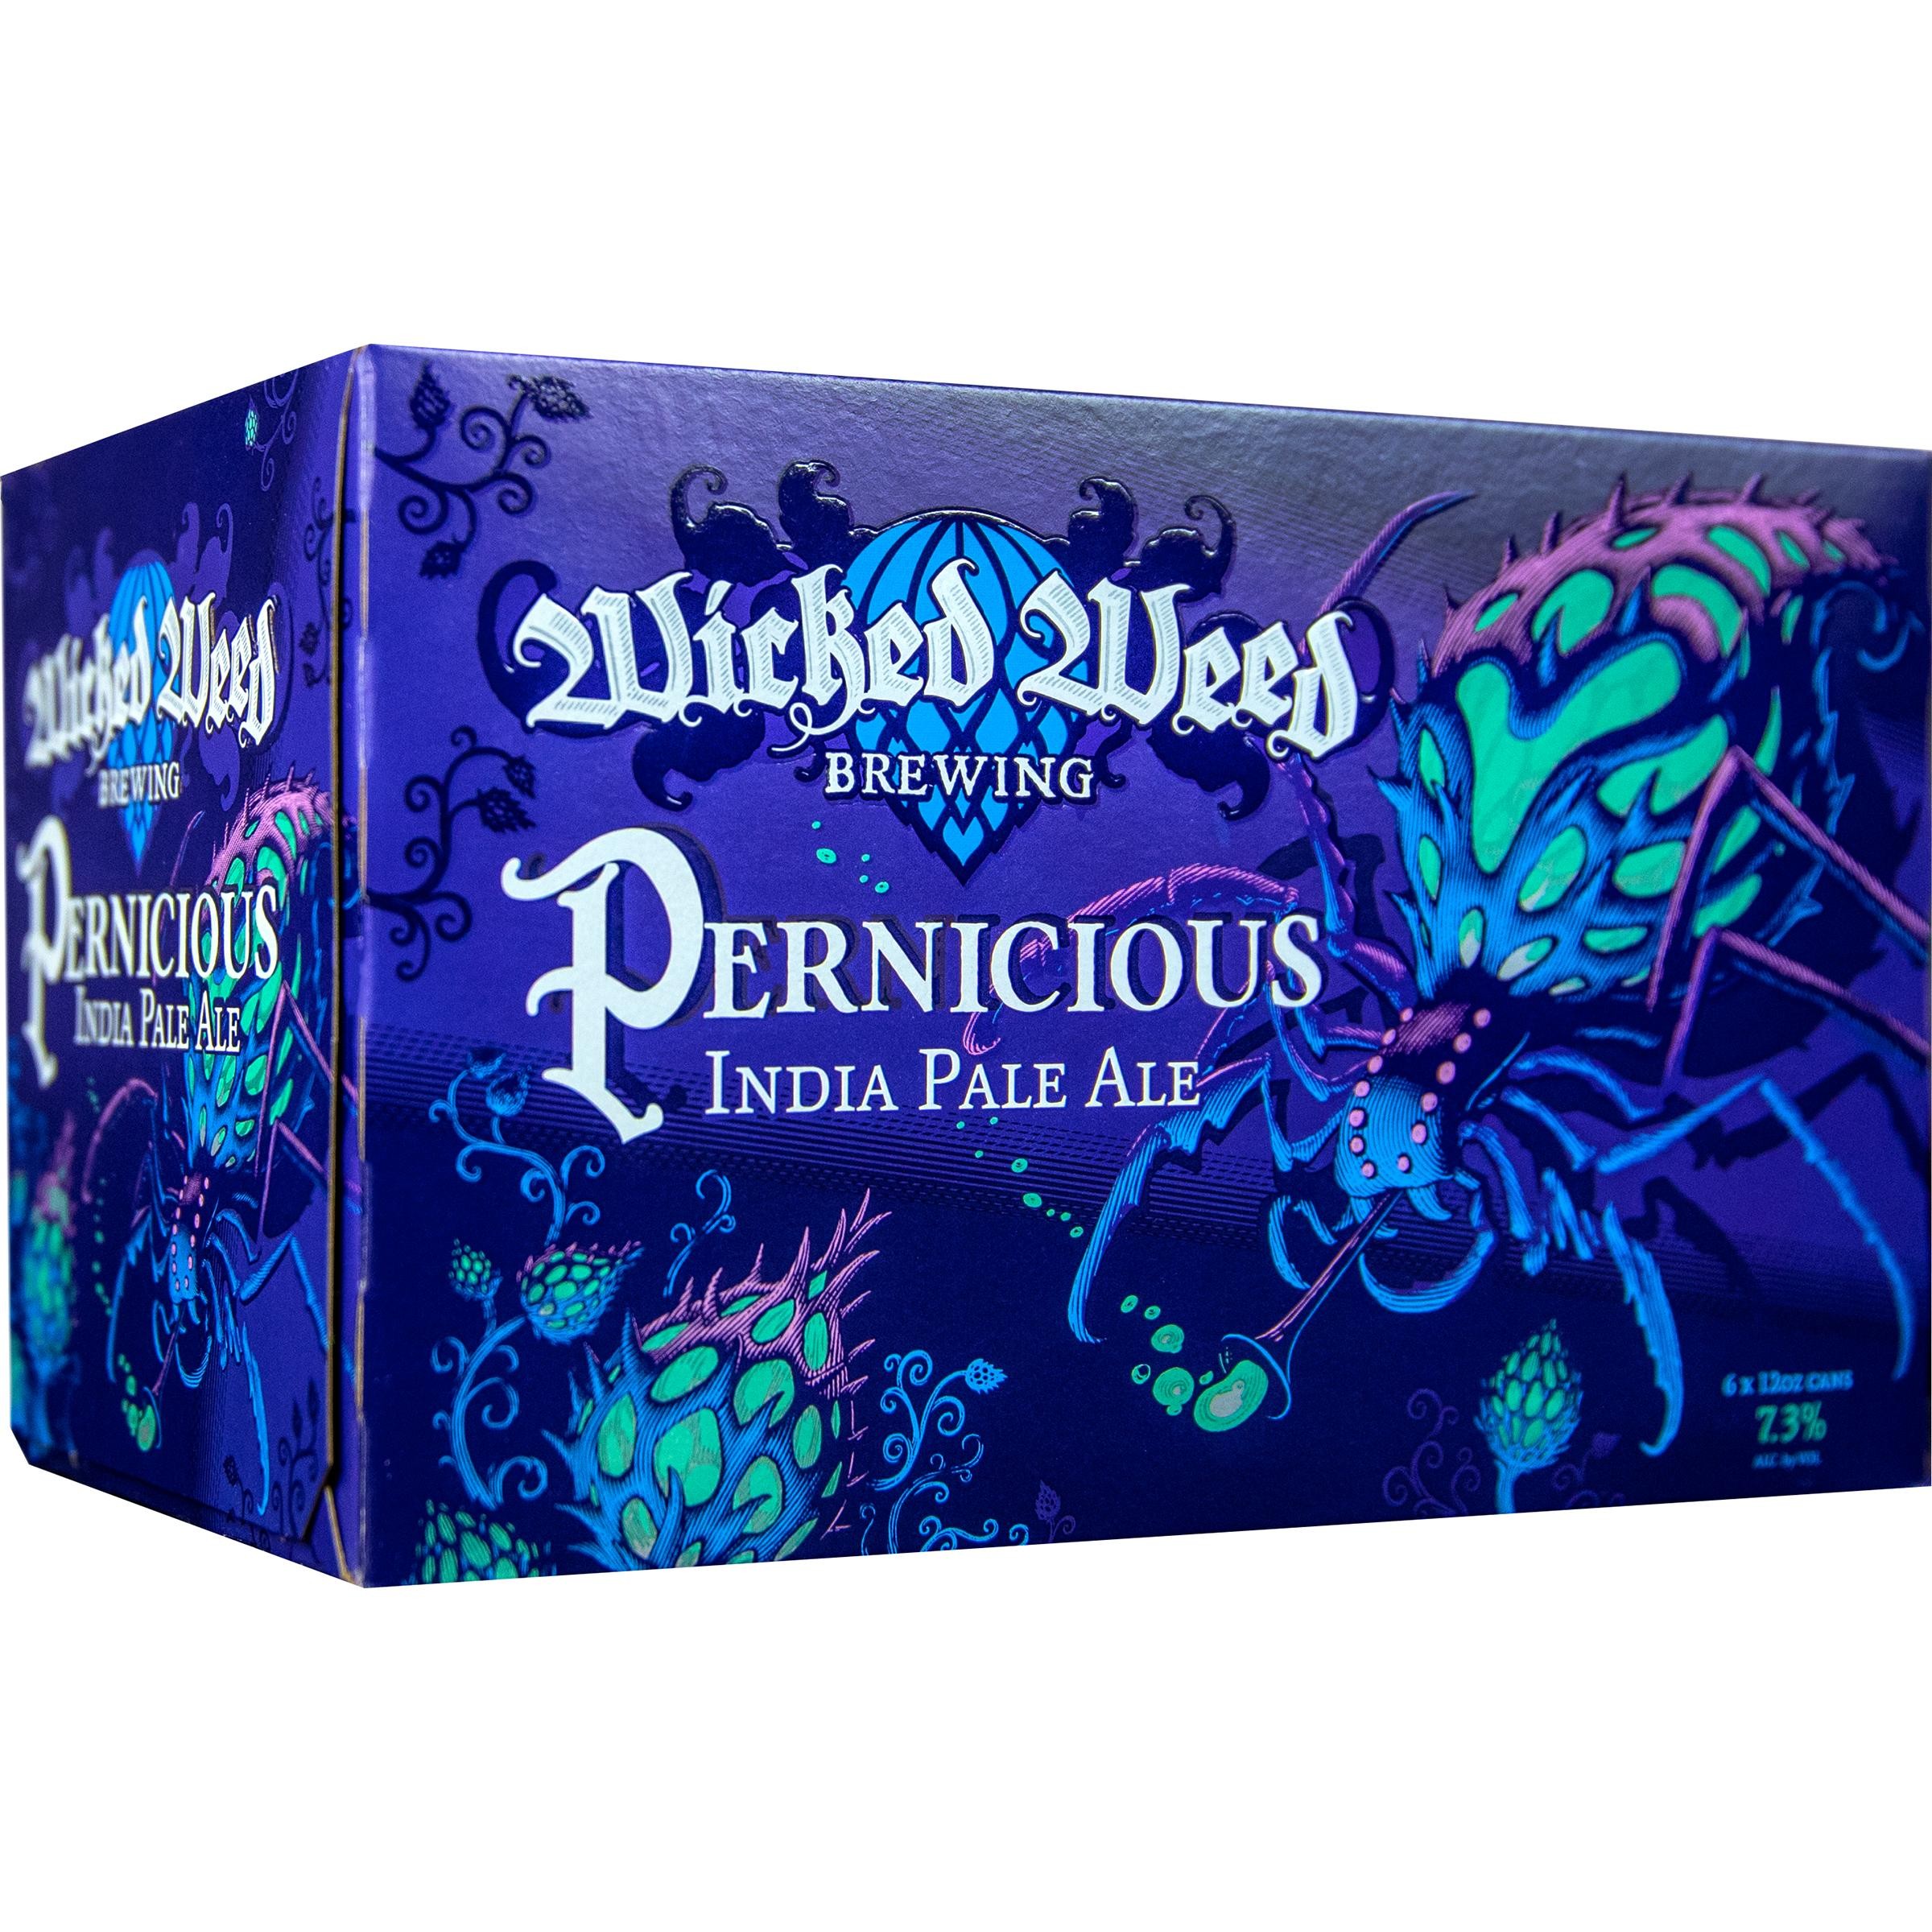 Wicked Weed Brewing Pernicious IPA Ale